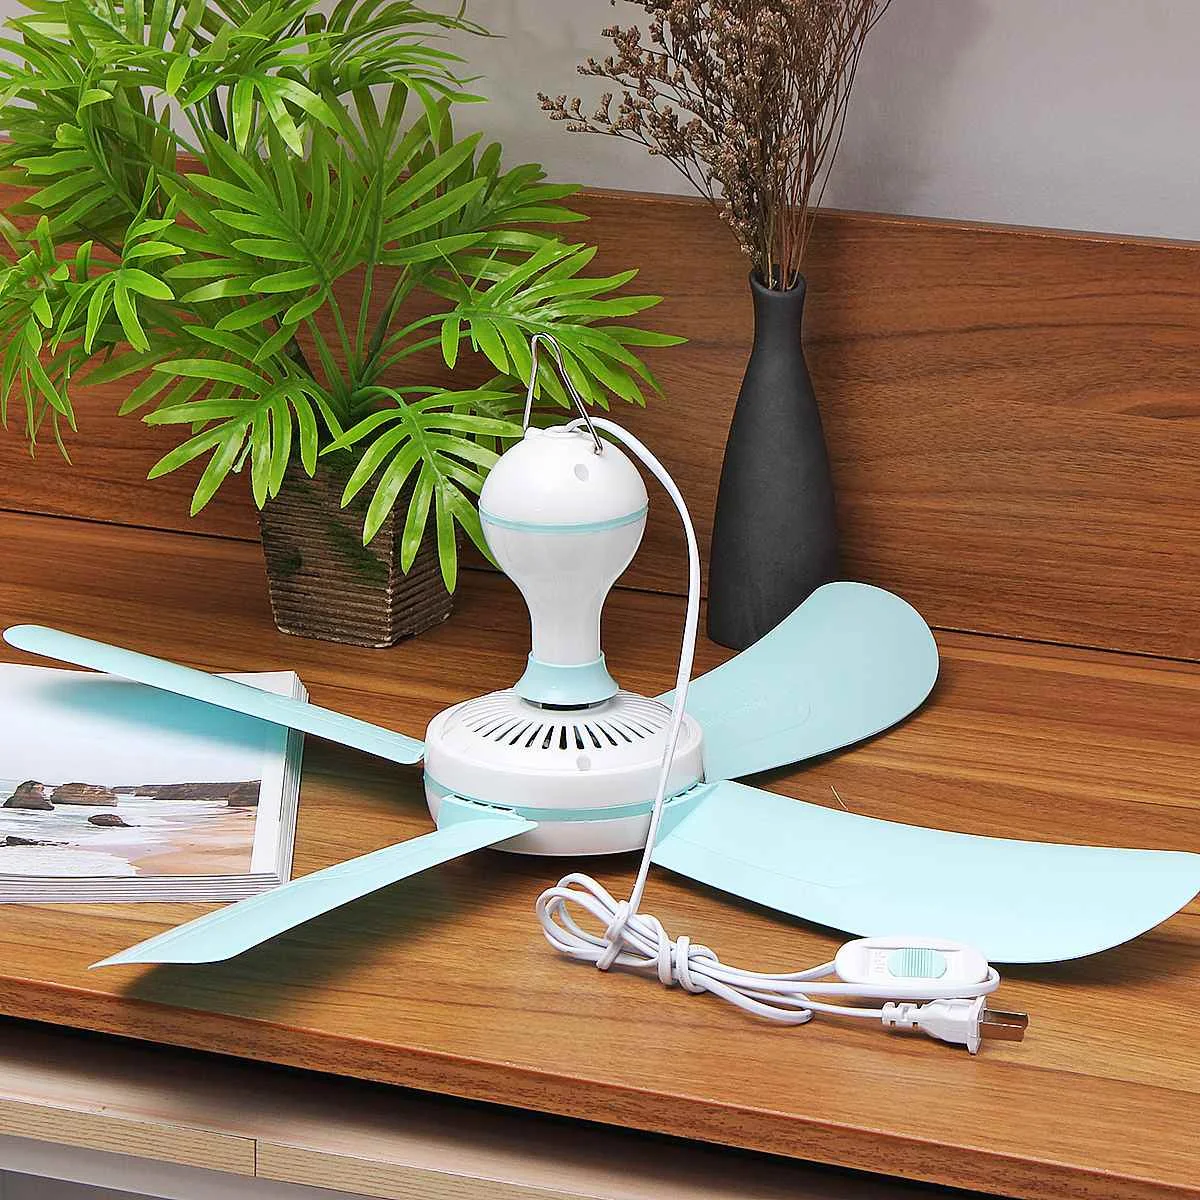 16w 220v Large Silent Ceiling Fan Blade Ceiling Fan Switch Cooling Portable Easy Hanging Summer Household Ceiling Fan